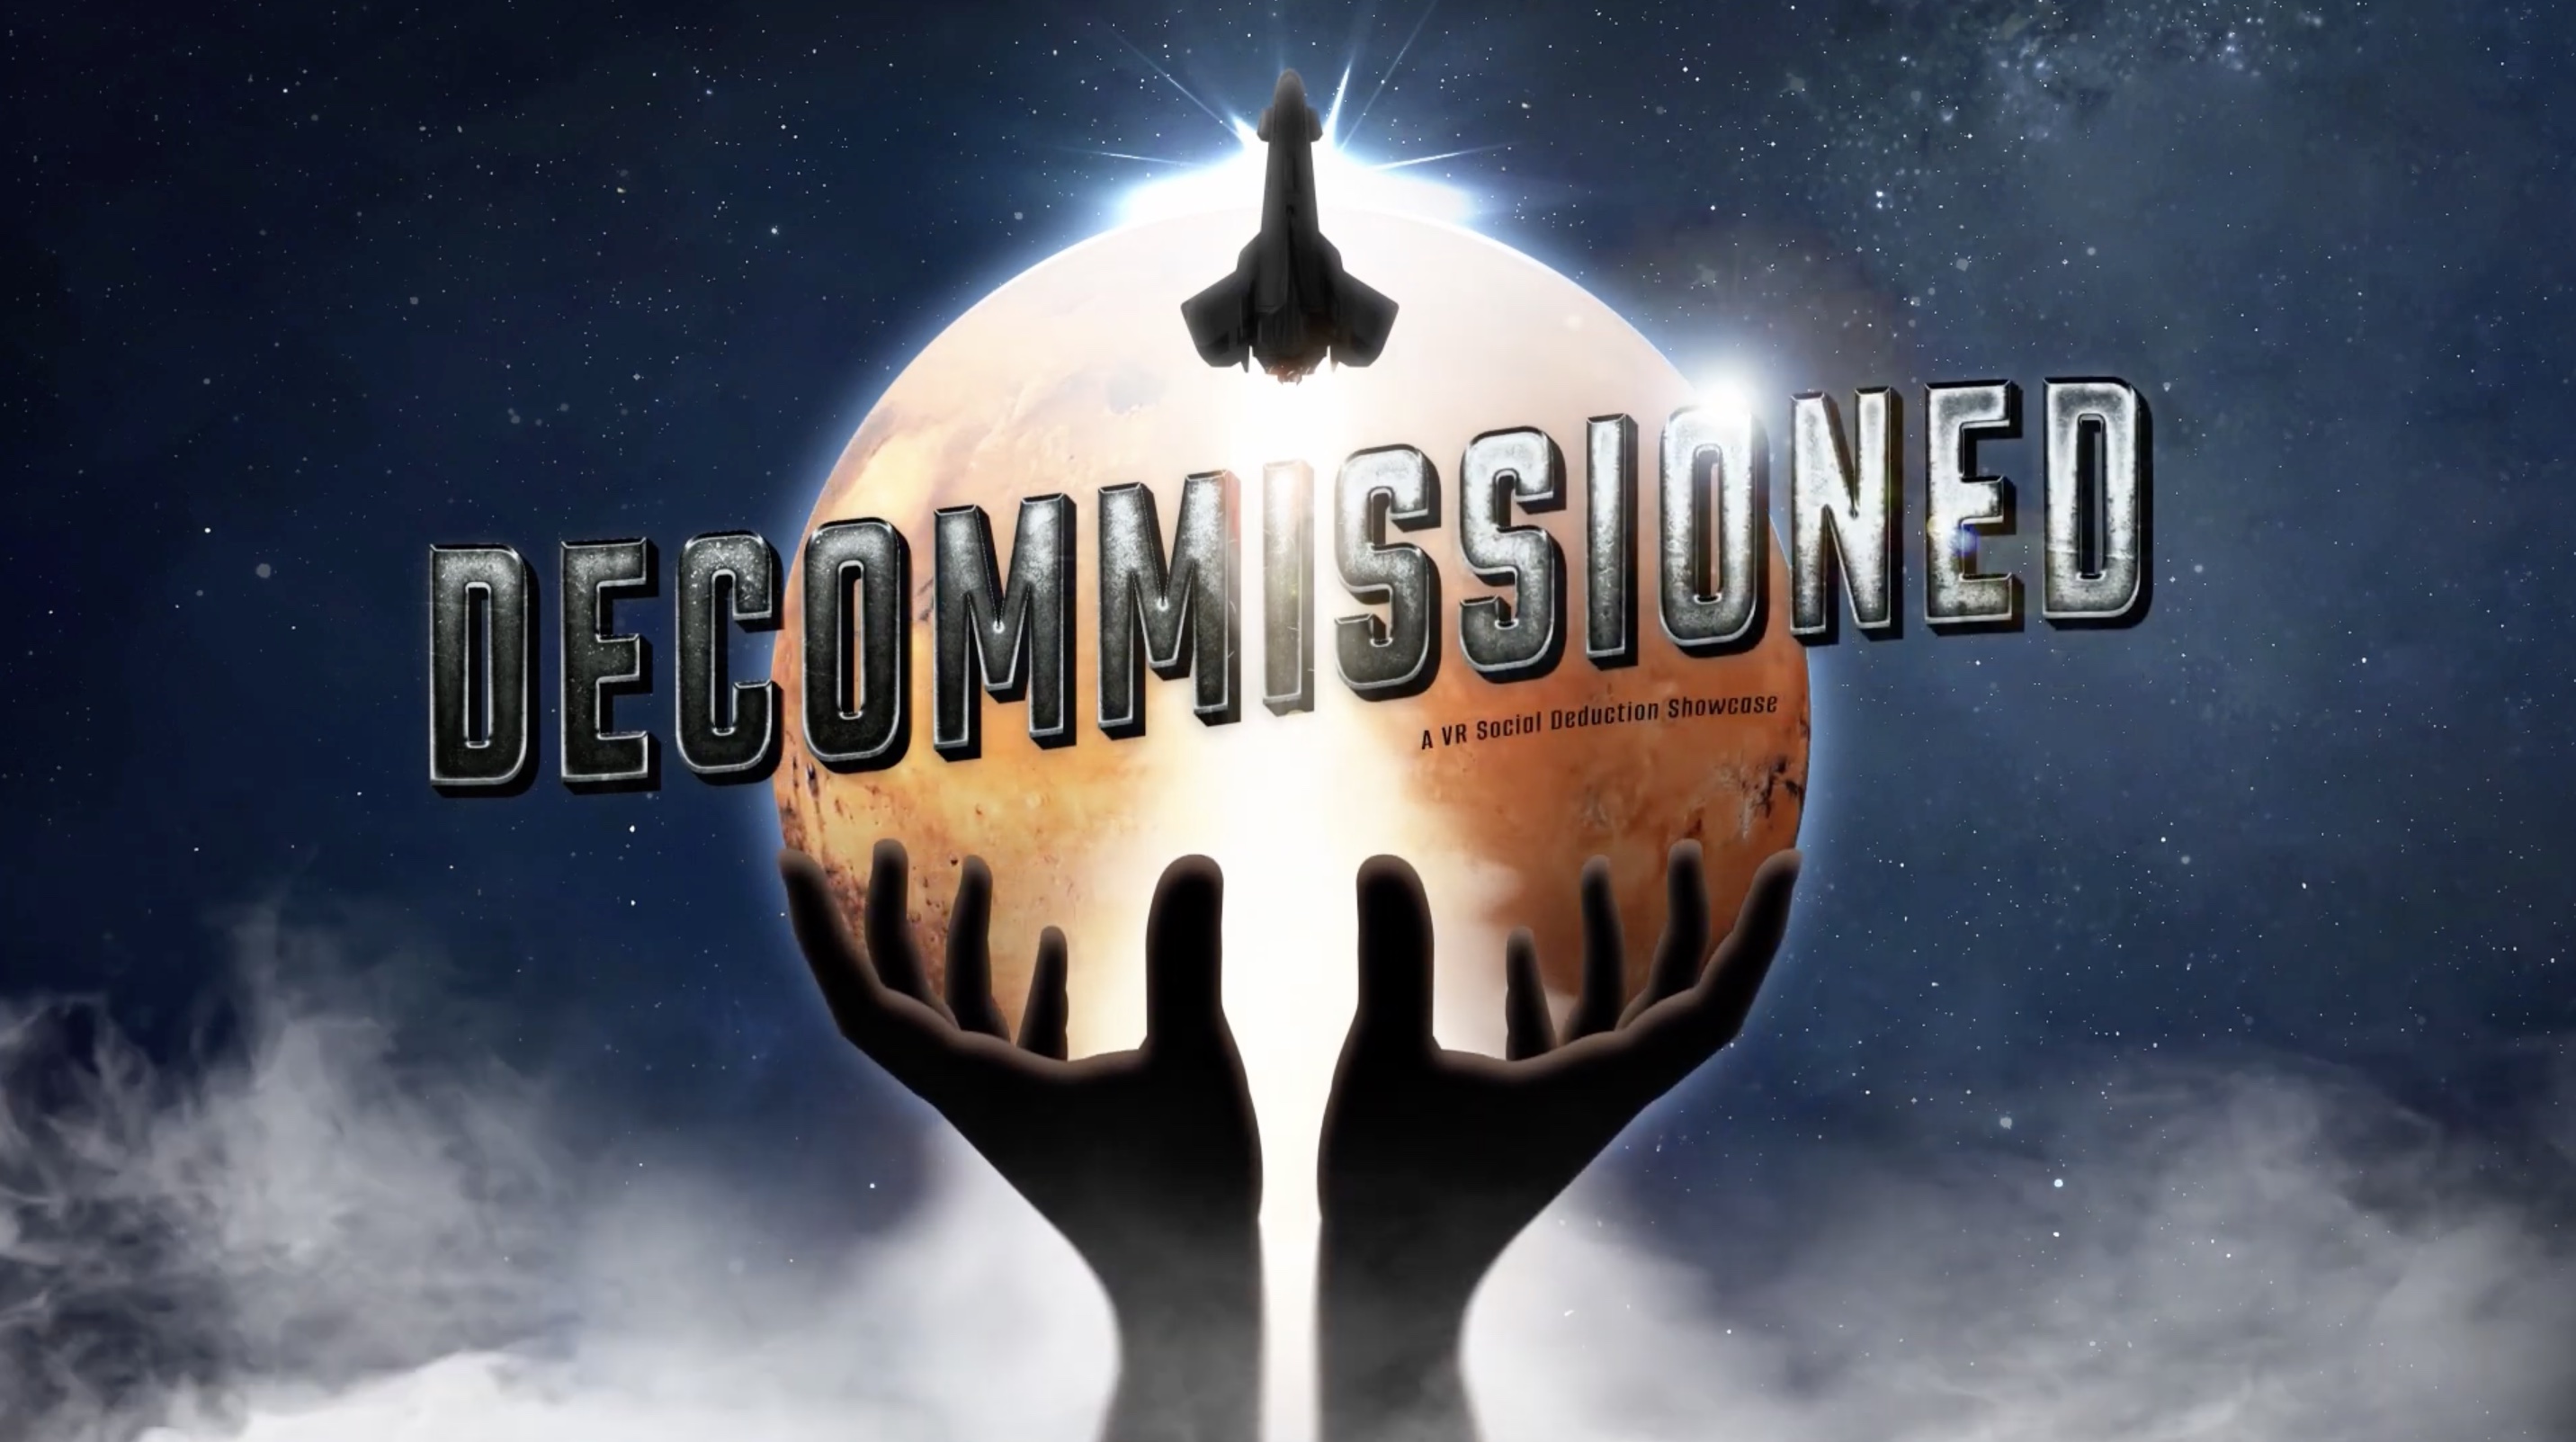 Try out Meta's new VR showcase app 'Decommissioned'